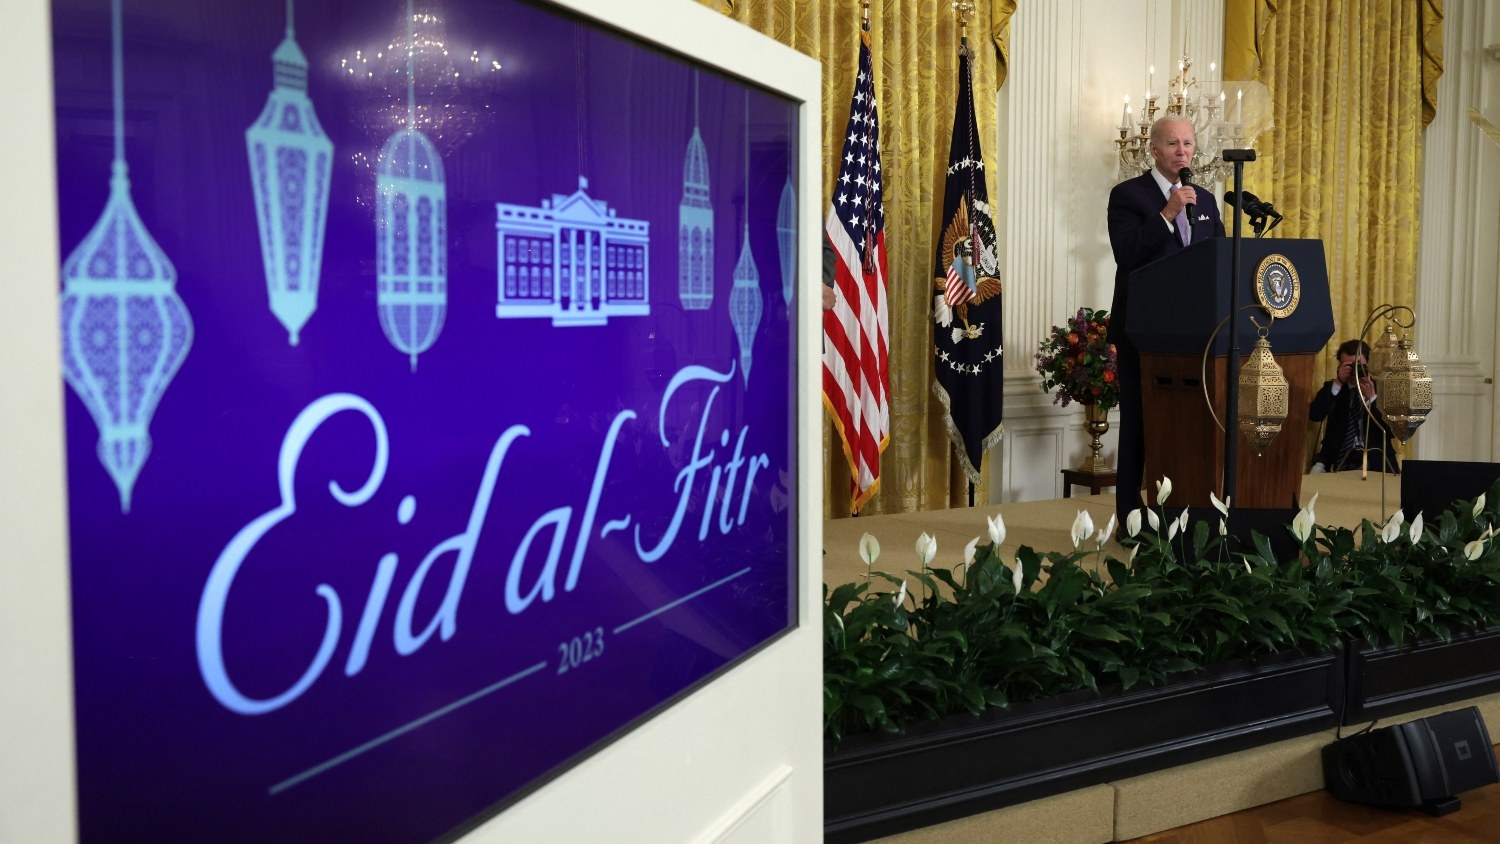 US President Joe Biden speaks during a reception celebrating Eid-al-Fitr in the East Room of the White House on 1 May 2023 in Washington DC.